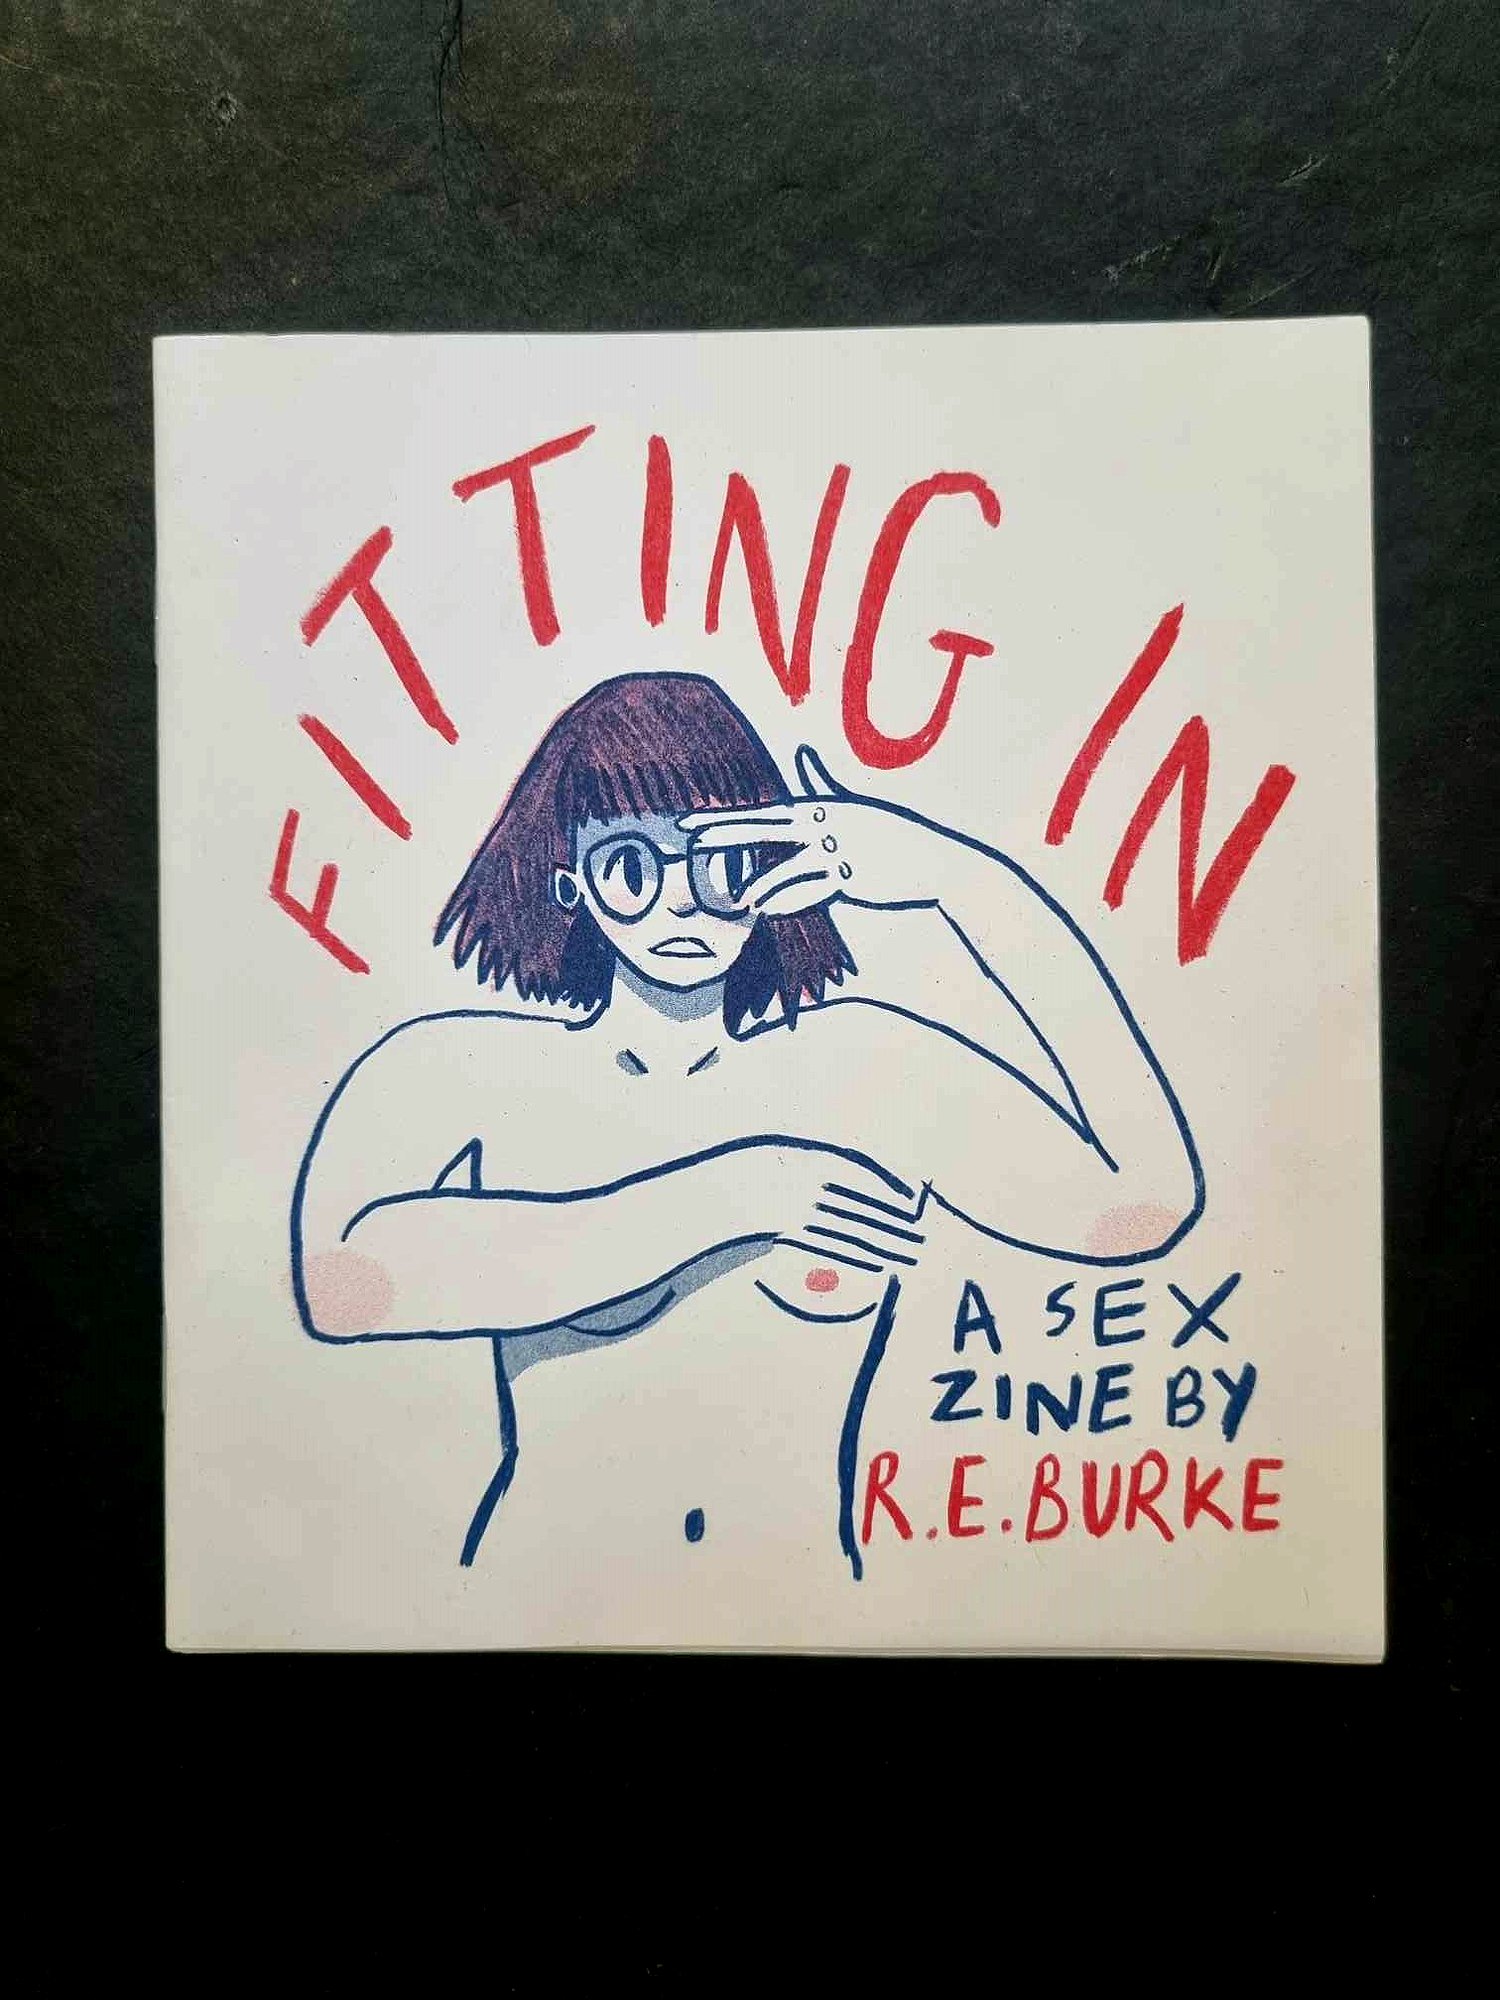 Fitting In (A Sex Zine)